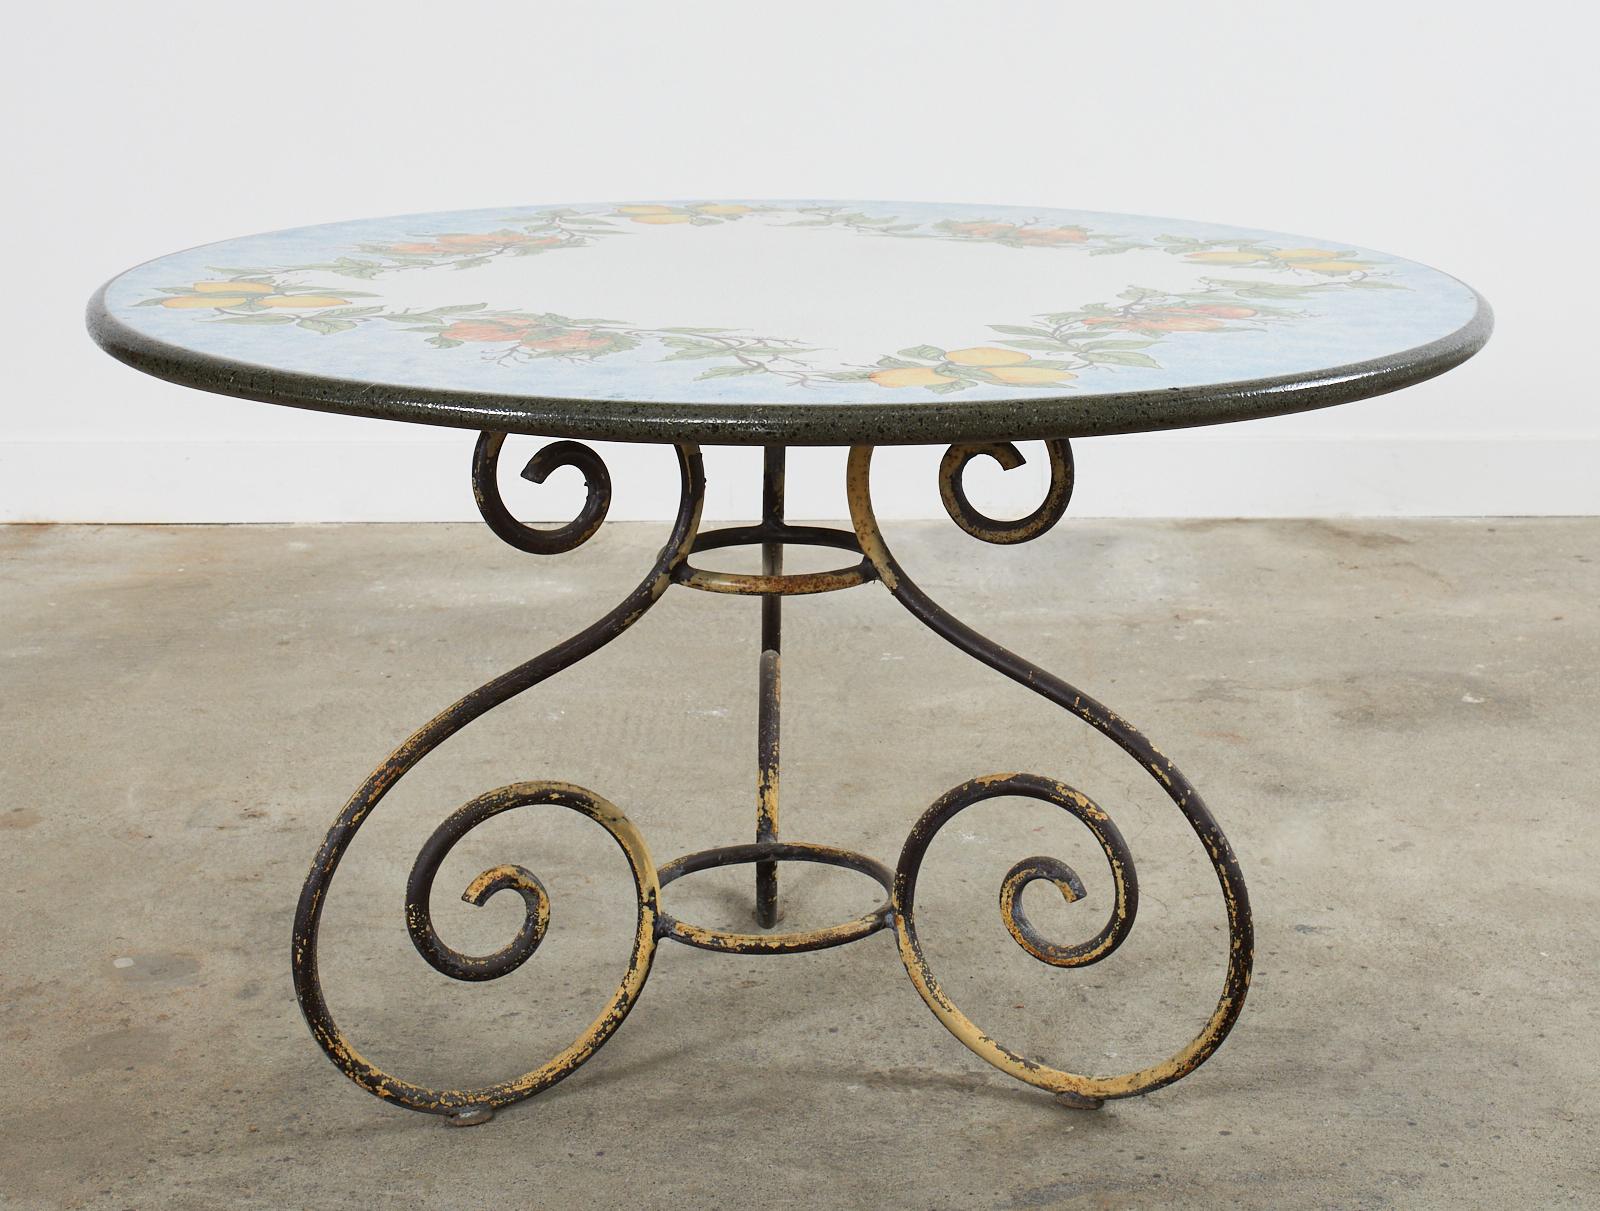 Italian Amalfi Style Glazed Stone and Iron Painted Garden Table For Sale 6